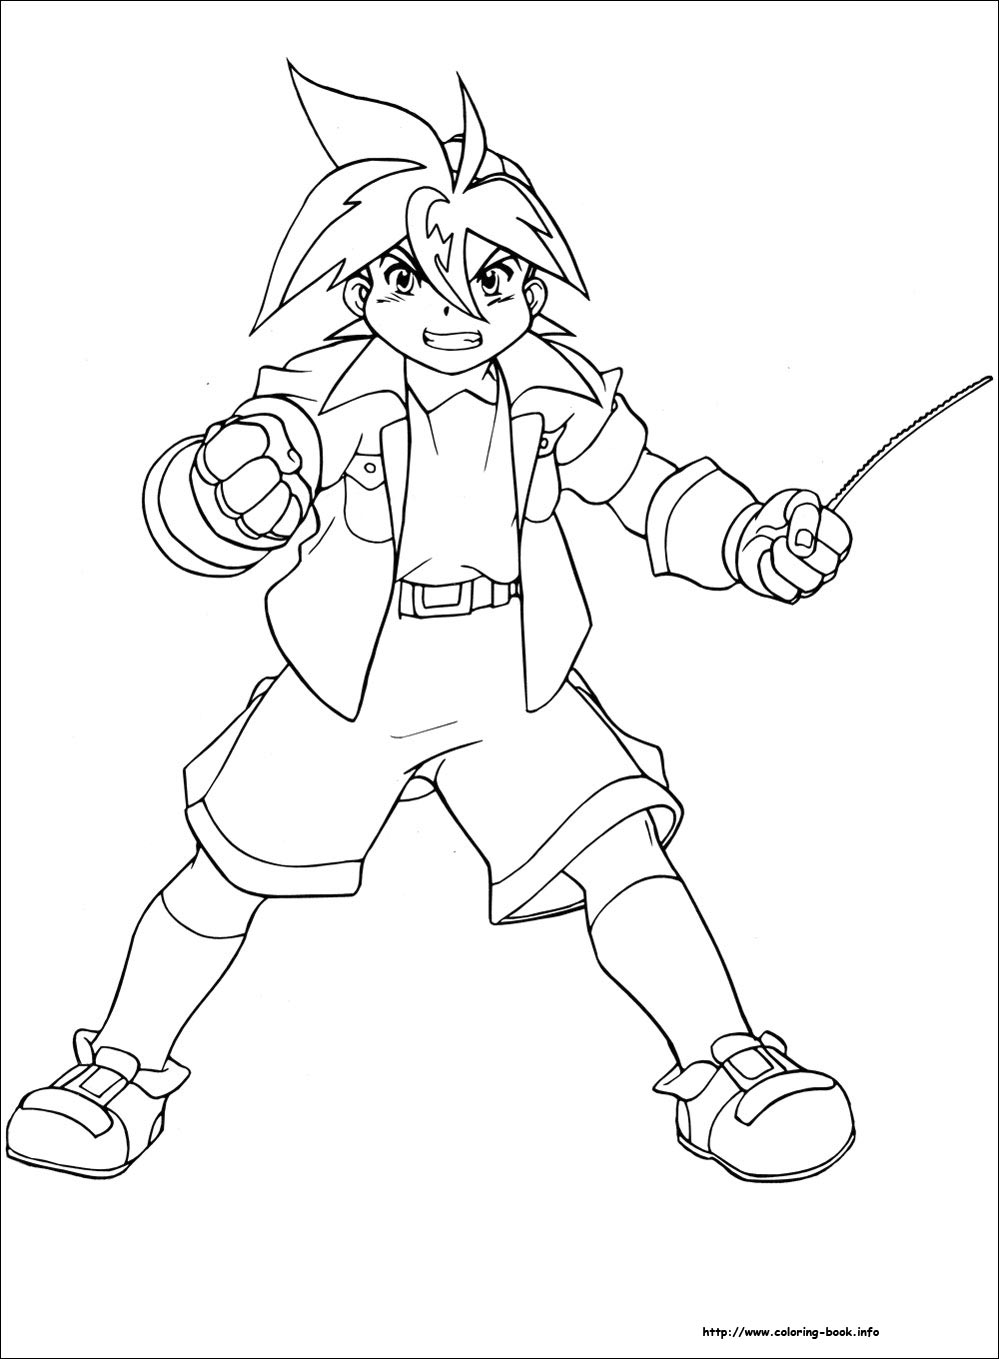 Beyblade coloring picture